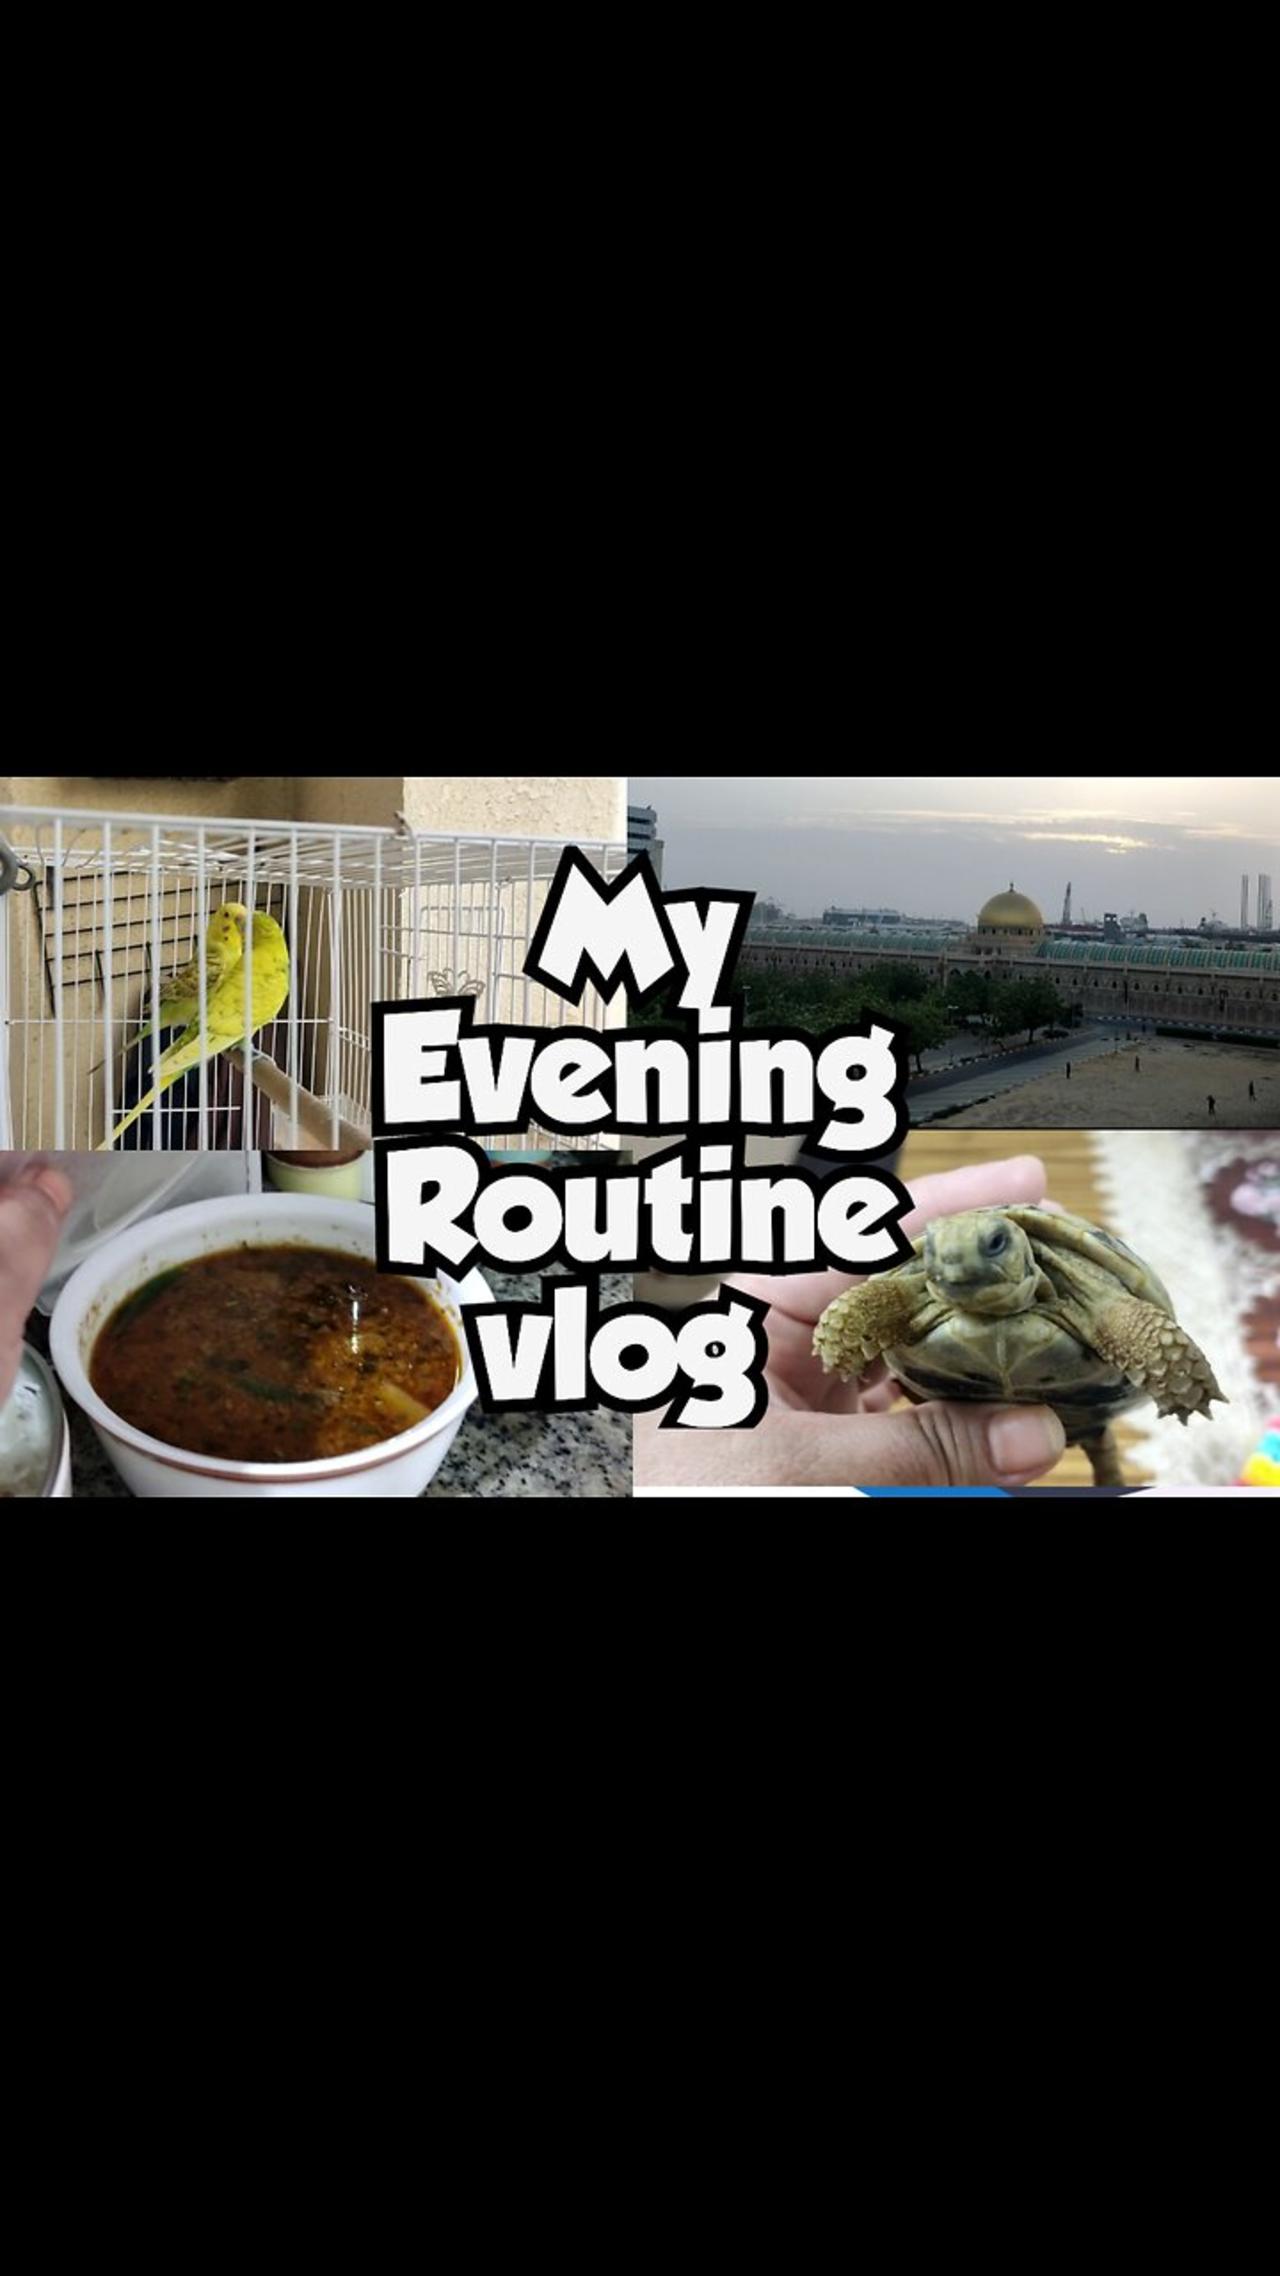 Evening Routine Vlog Cooking LEGO Ship and Turtle Time| My Routine in UAE Sharjah | Tuba Durrani C&M